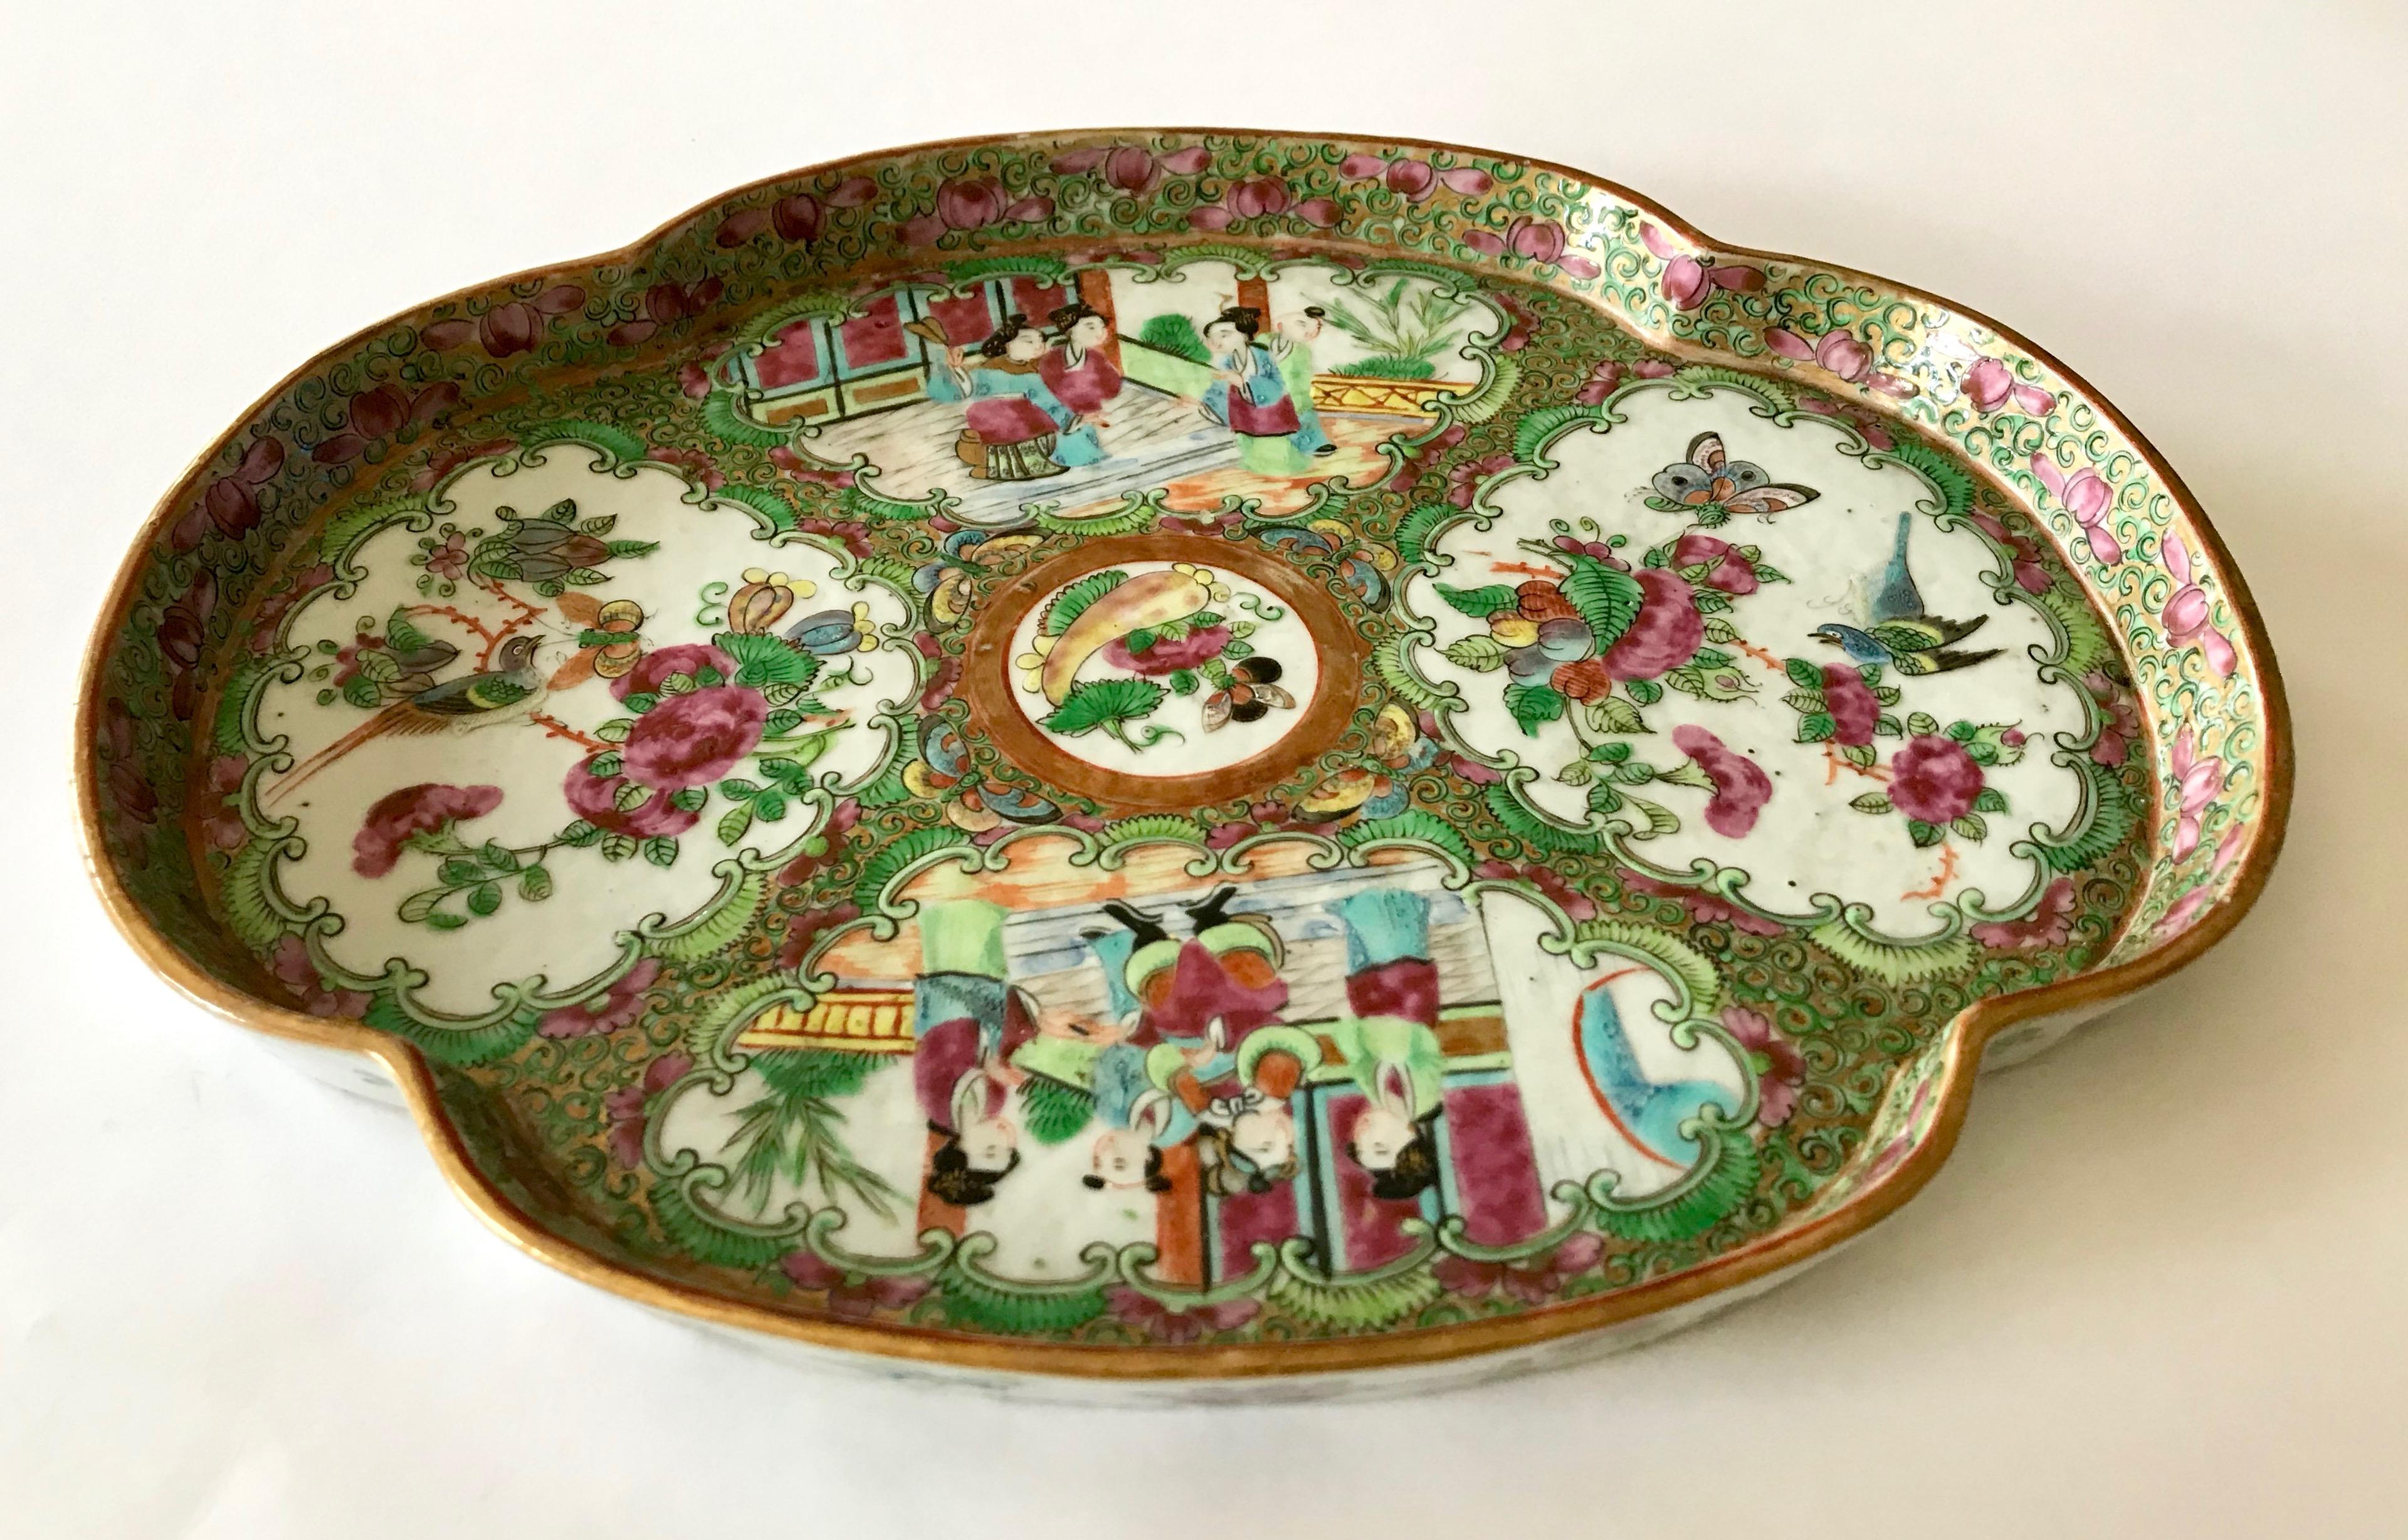 Early 19th century canton Chinese export rose medallion porcelain dish / tray.
Measures: 28.00cm x 23.00cm.

   